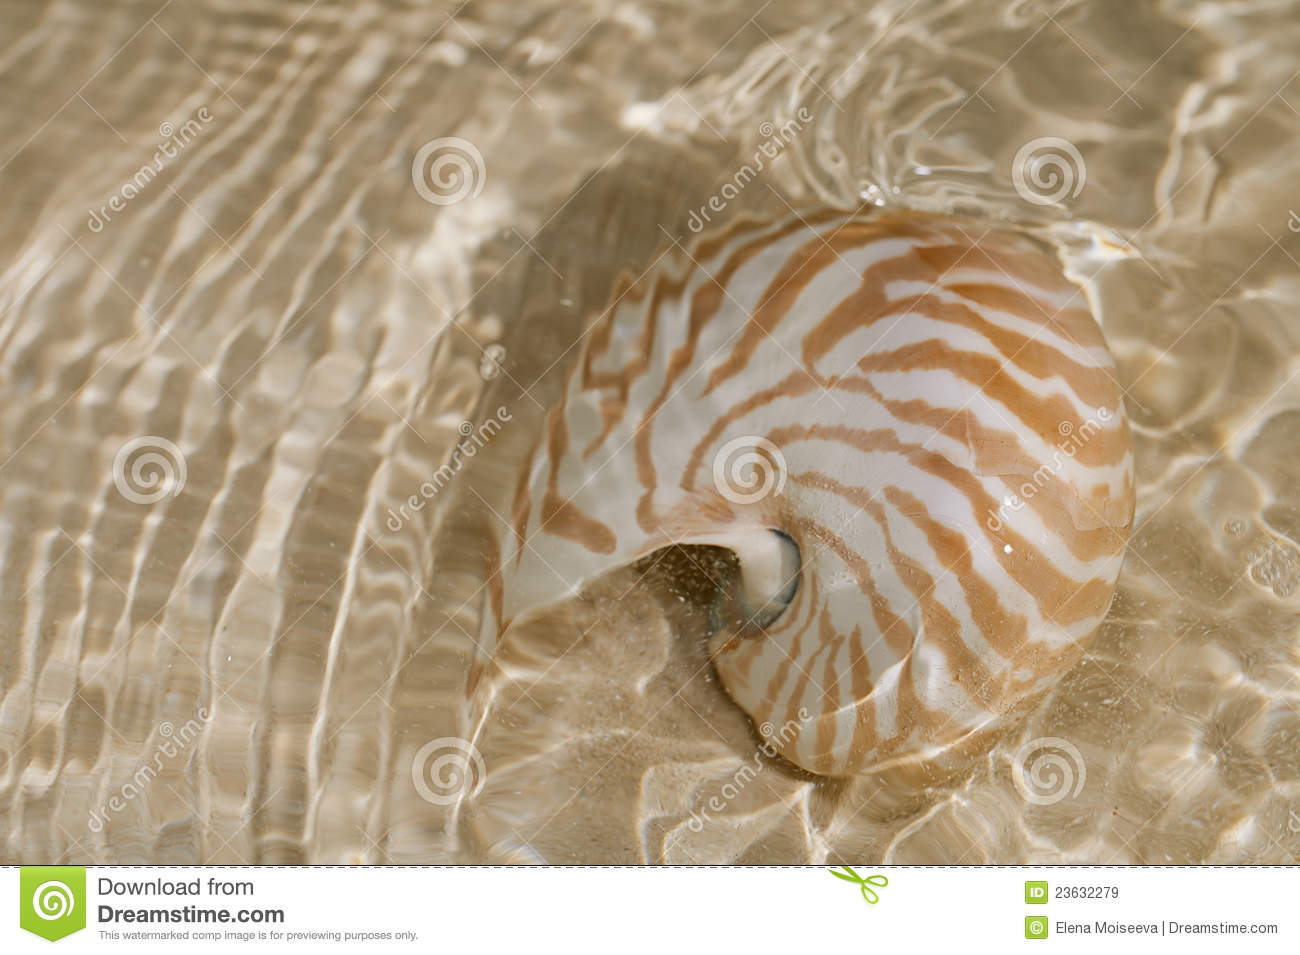 Nautilus Shell In The Sea Water Royalty Free Stock Images   Image